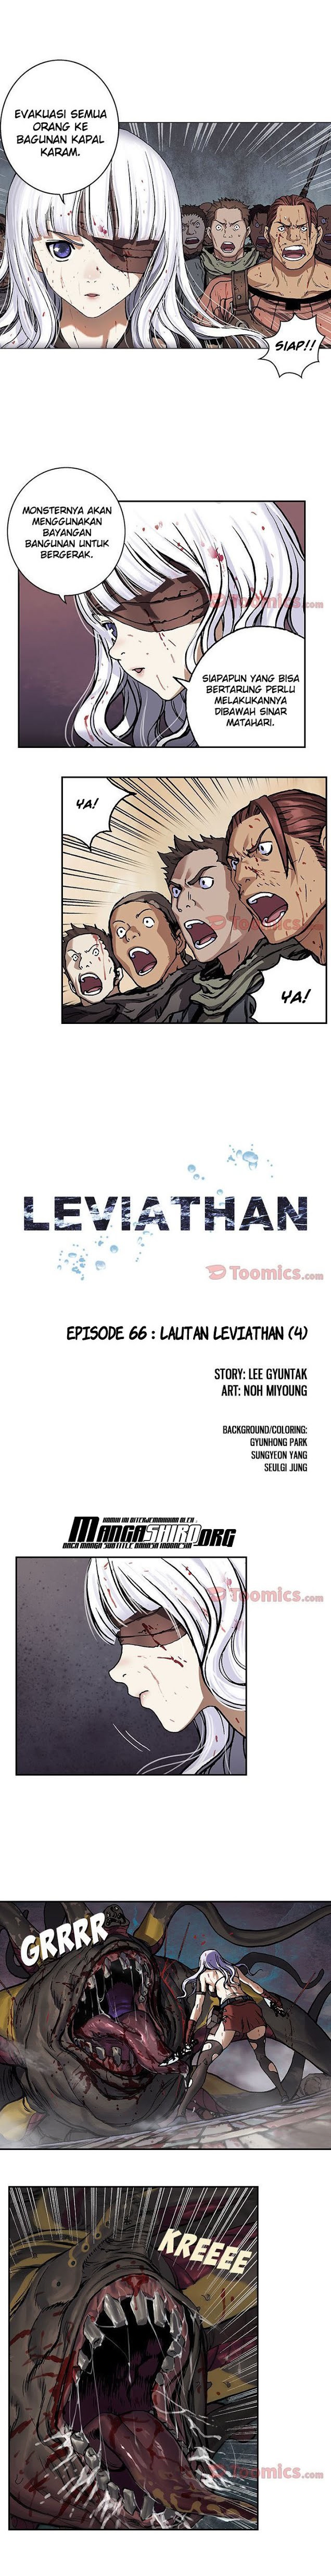 Leviathan Chapter 66